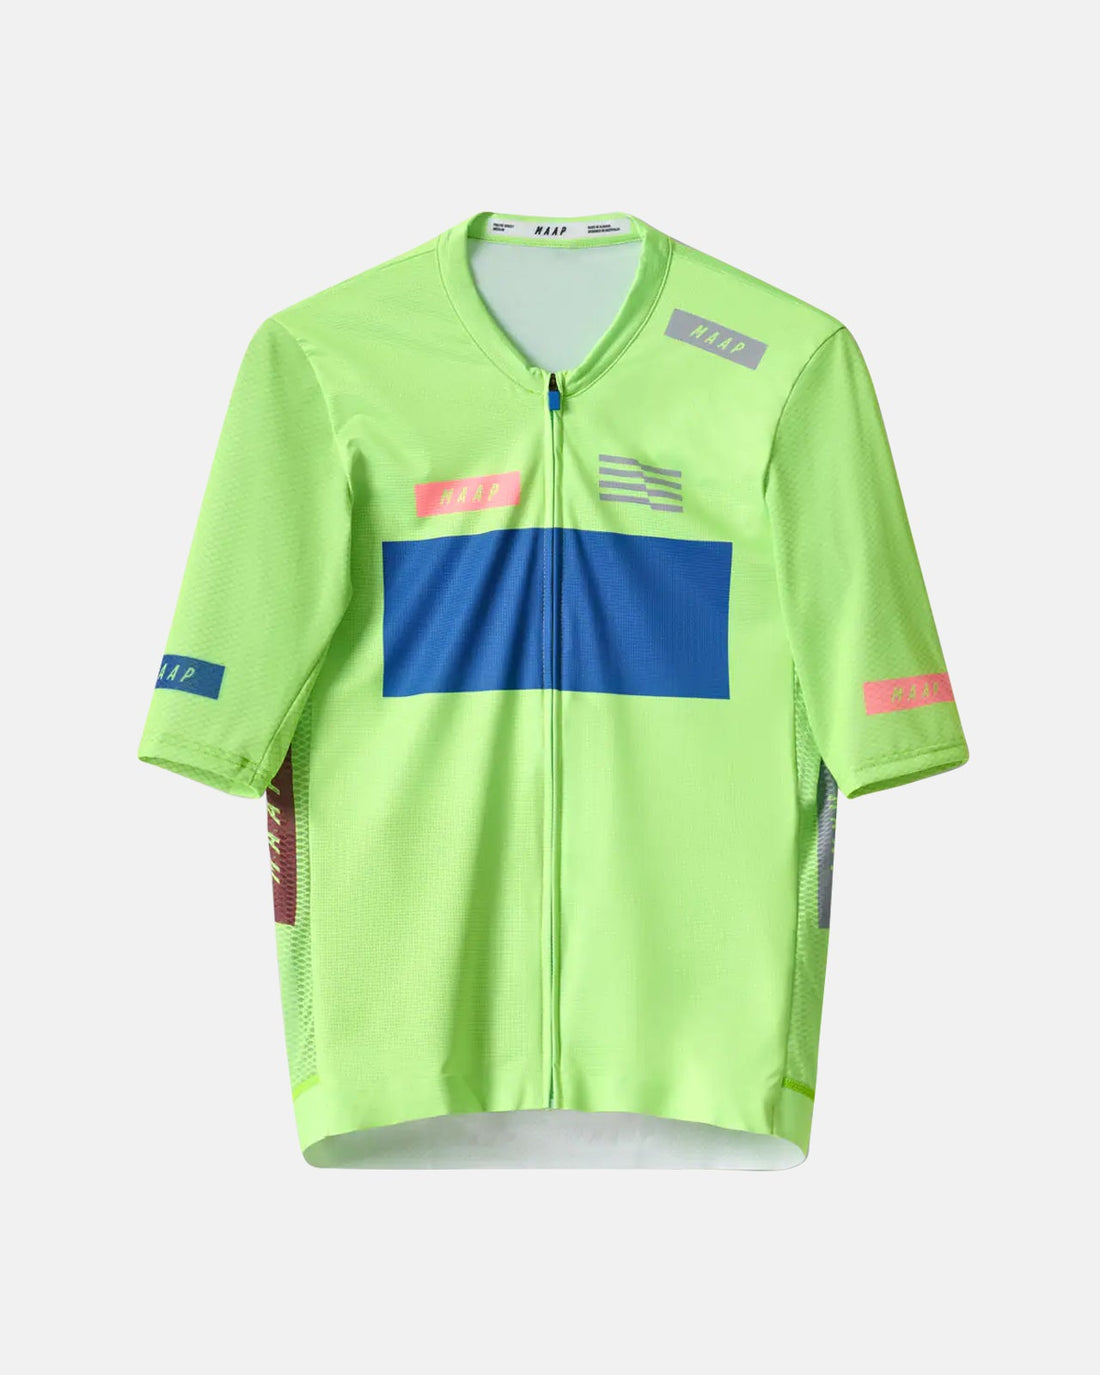 System Pro Air Jersey - Glow - MAAP